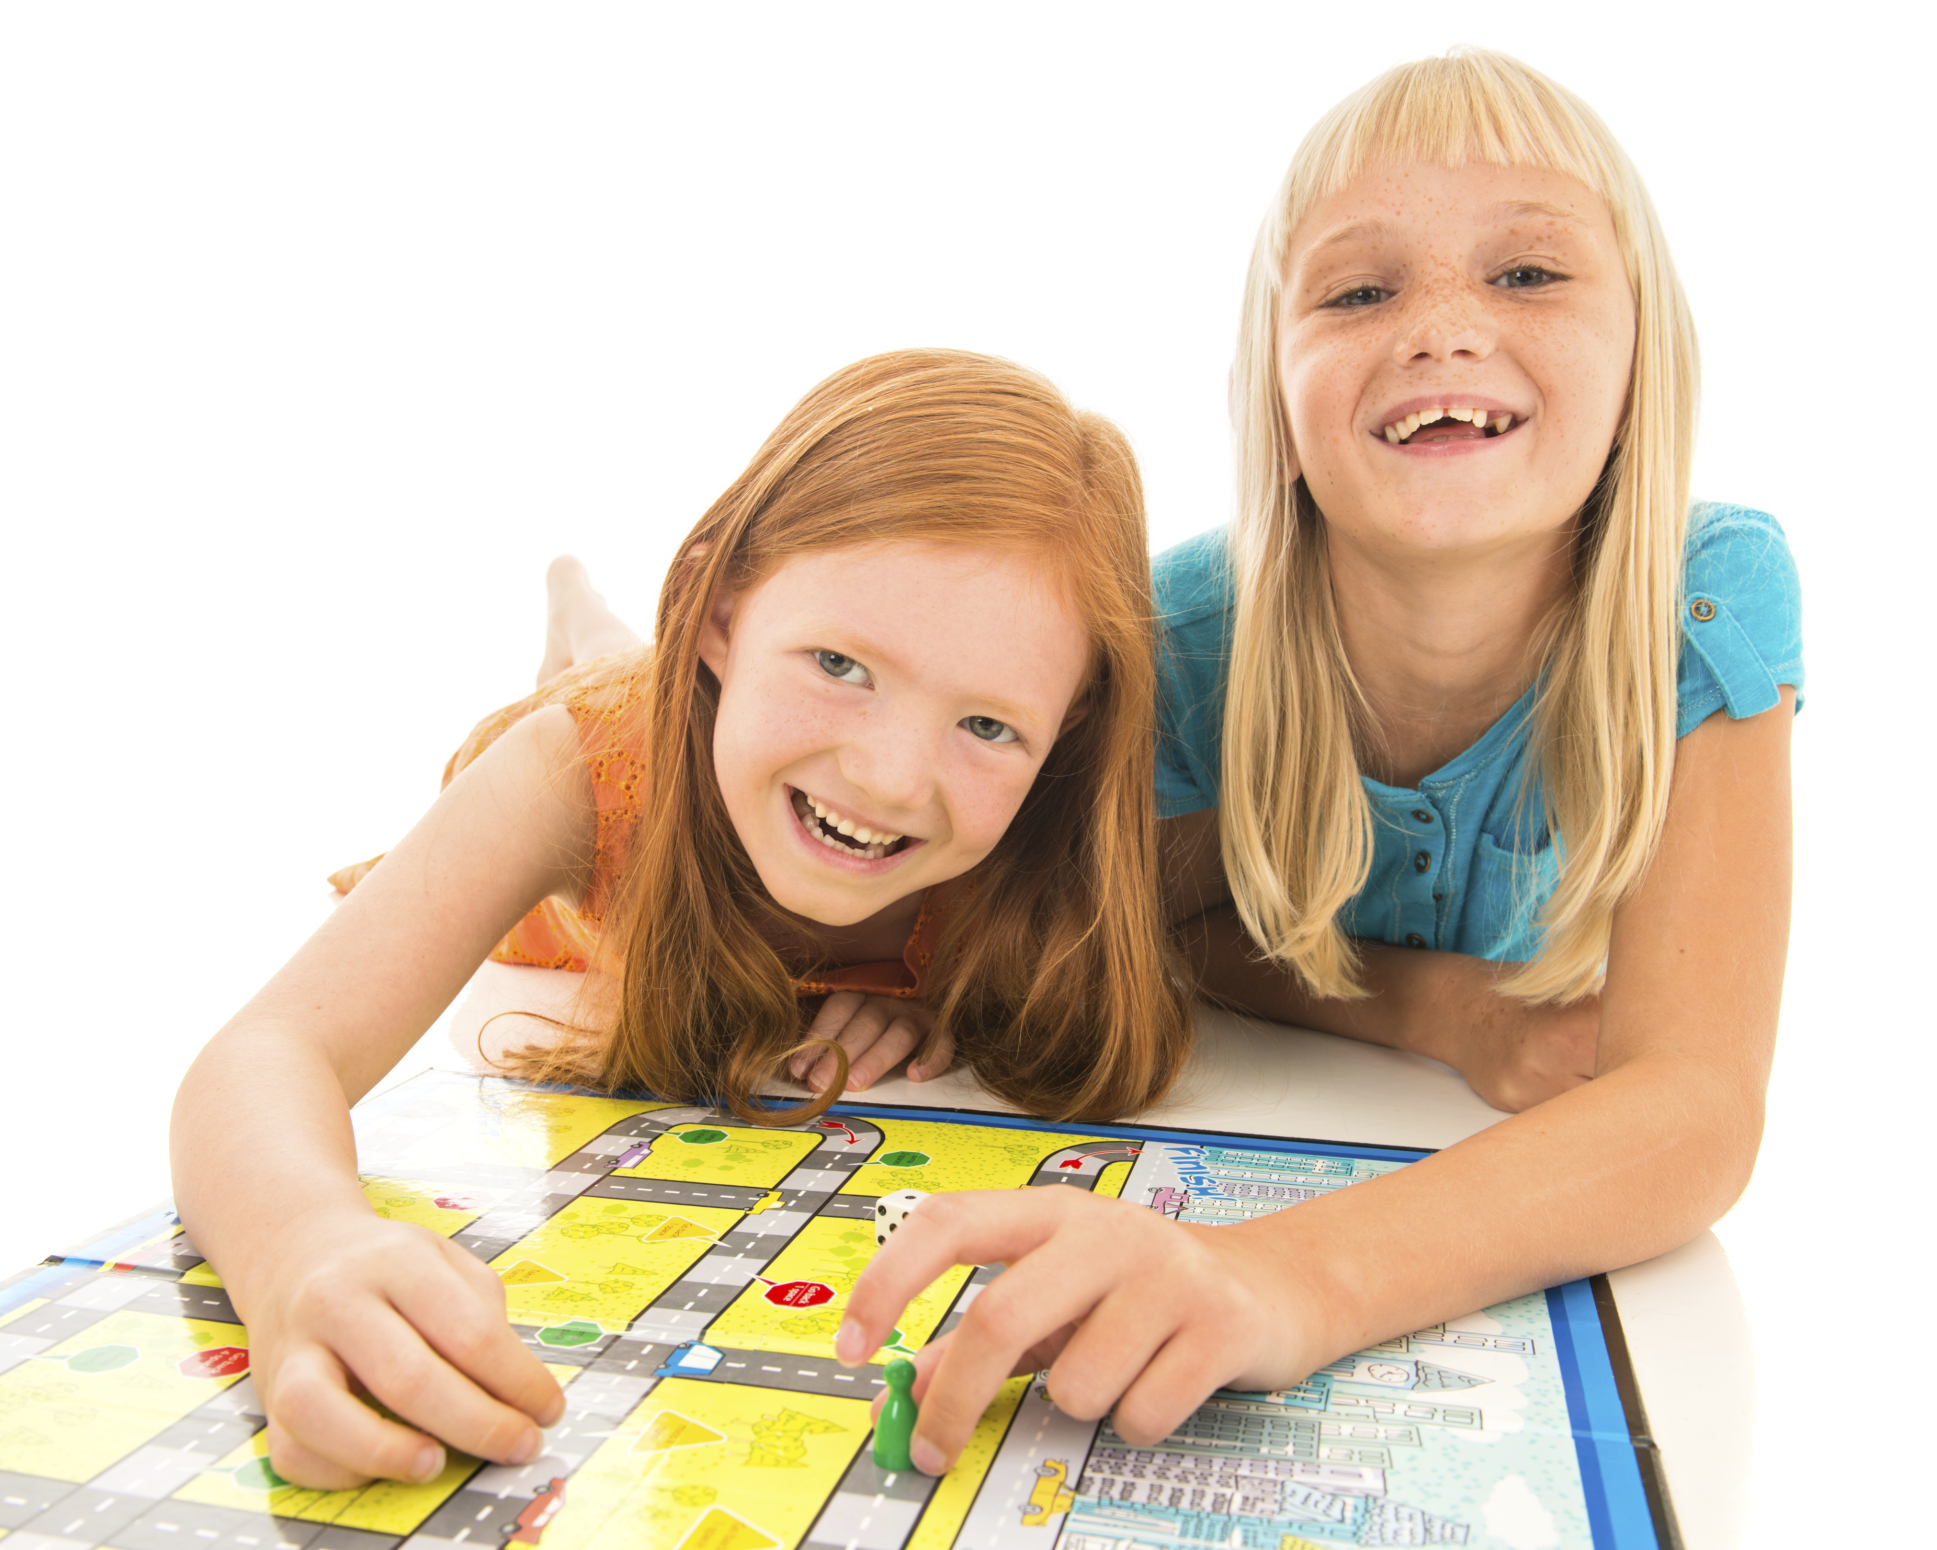 Two girls playing a board game.